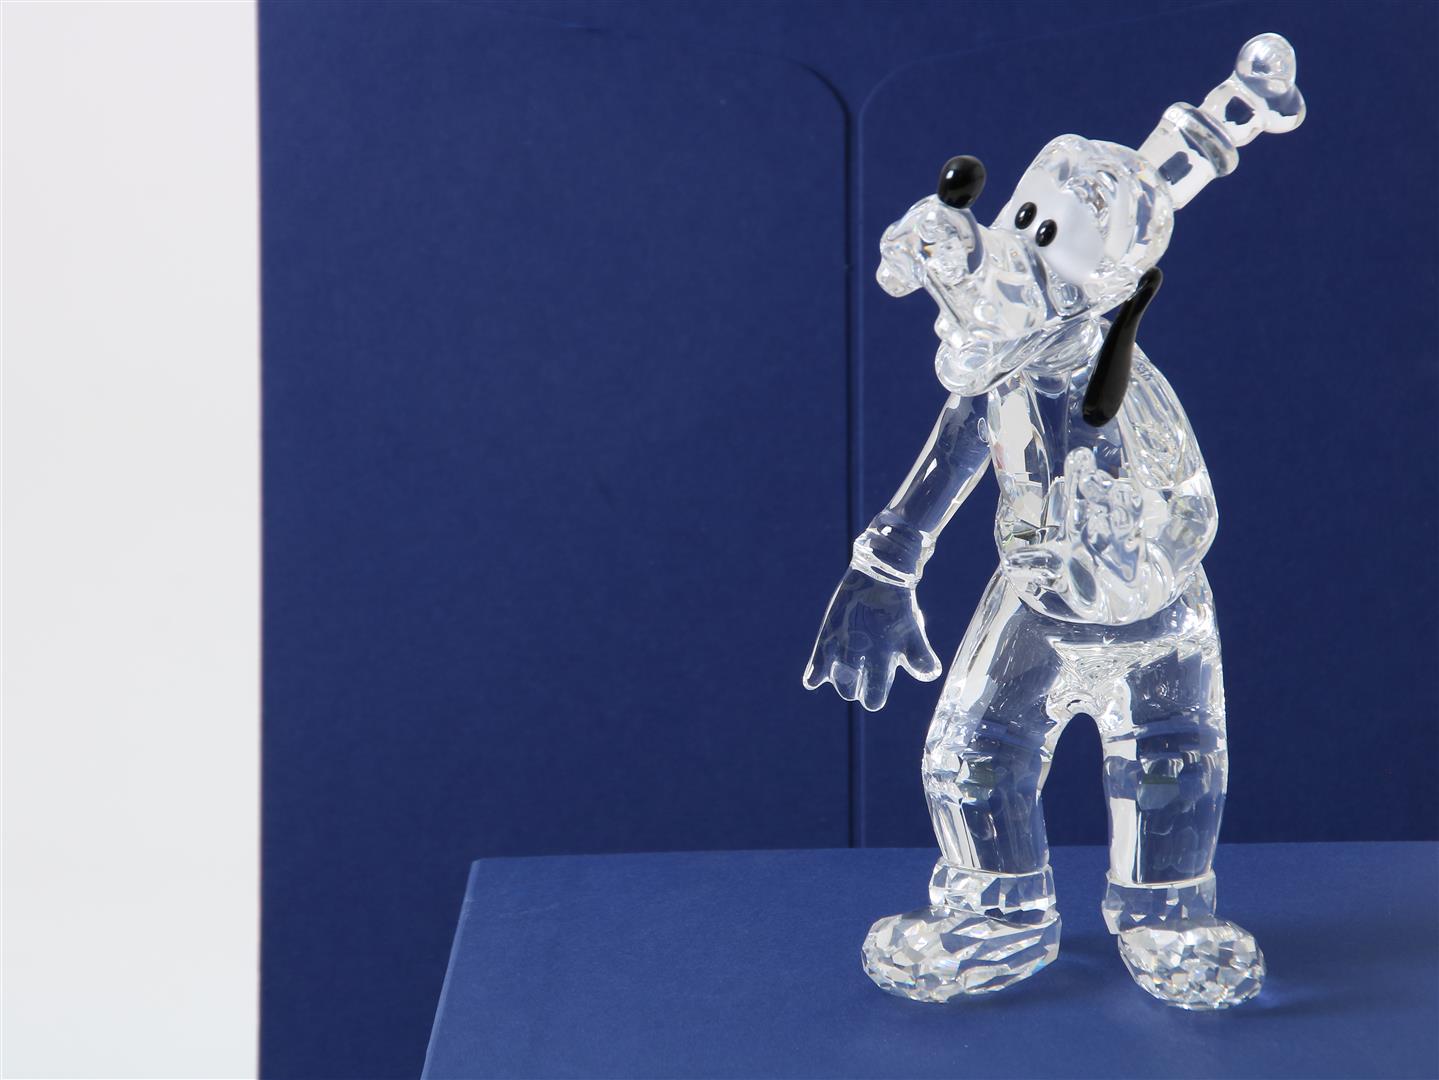 Series of 6 Swarovski crystal sculptures, Disney Showcase Collection, Donald Duck, Daisy Duck, - Image 4 of 11